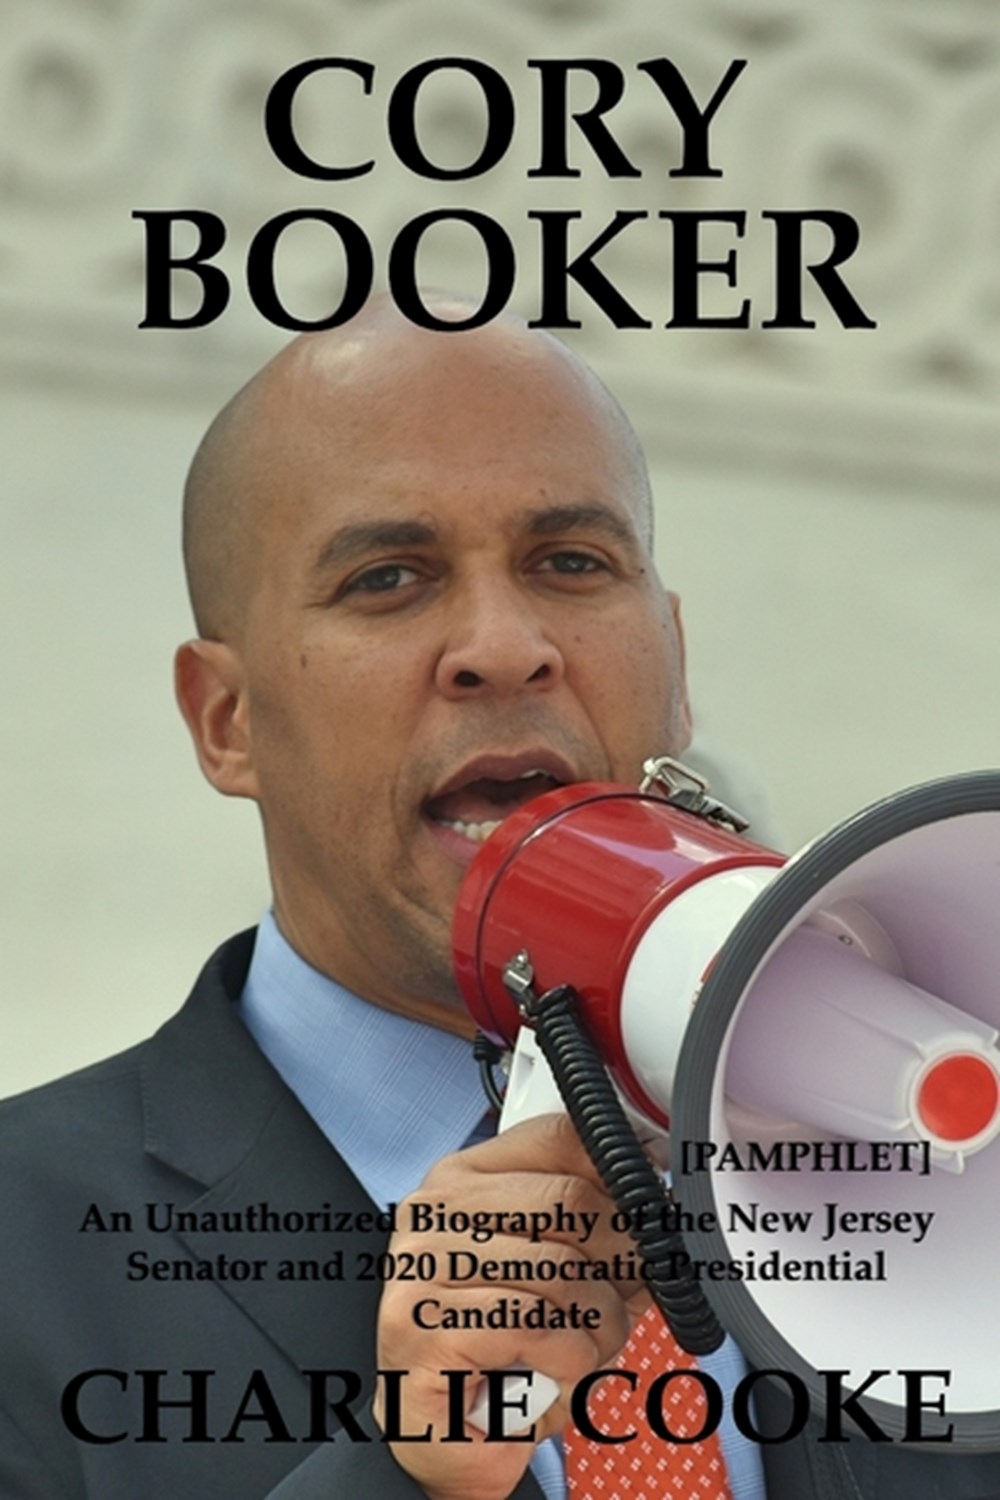 Cory Booker An Unauthorized Biography of the New Jersey Senator and 2020 Democratic Presidential Can